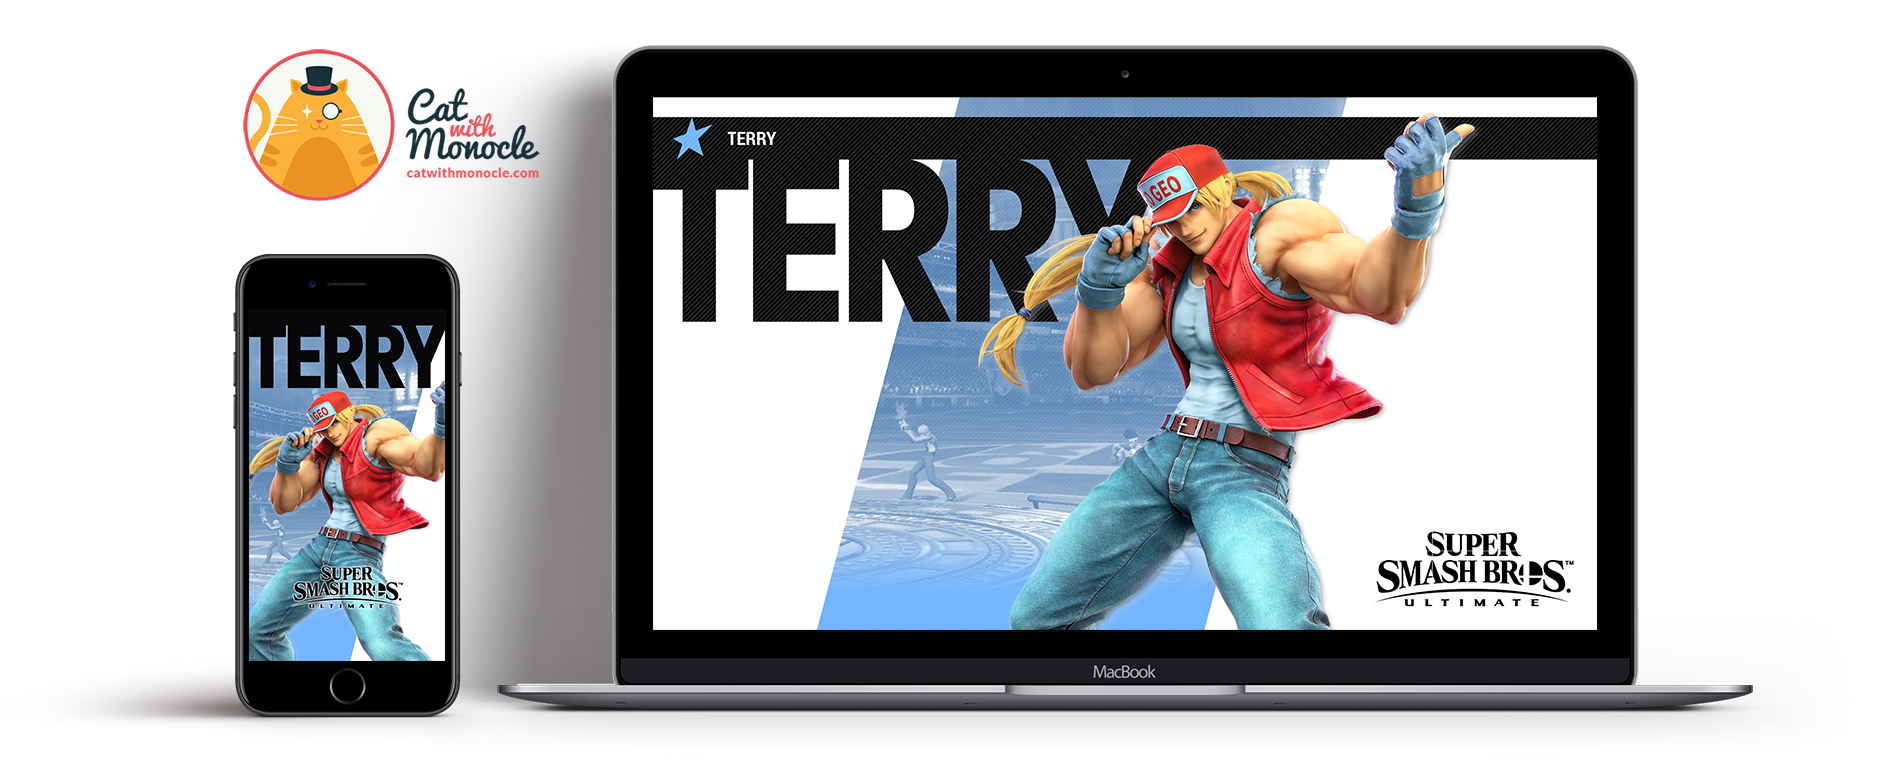 Super Smash Bros Ultimate Terry Wallpapers Costume 5